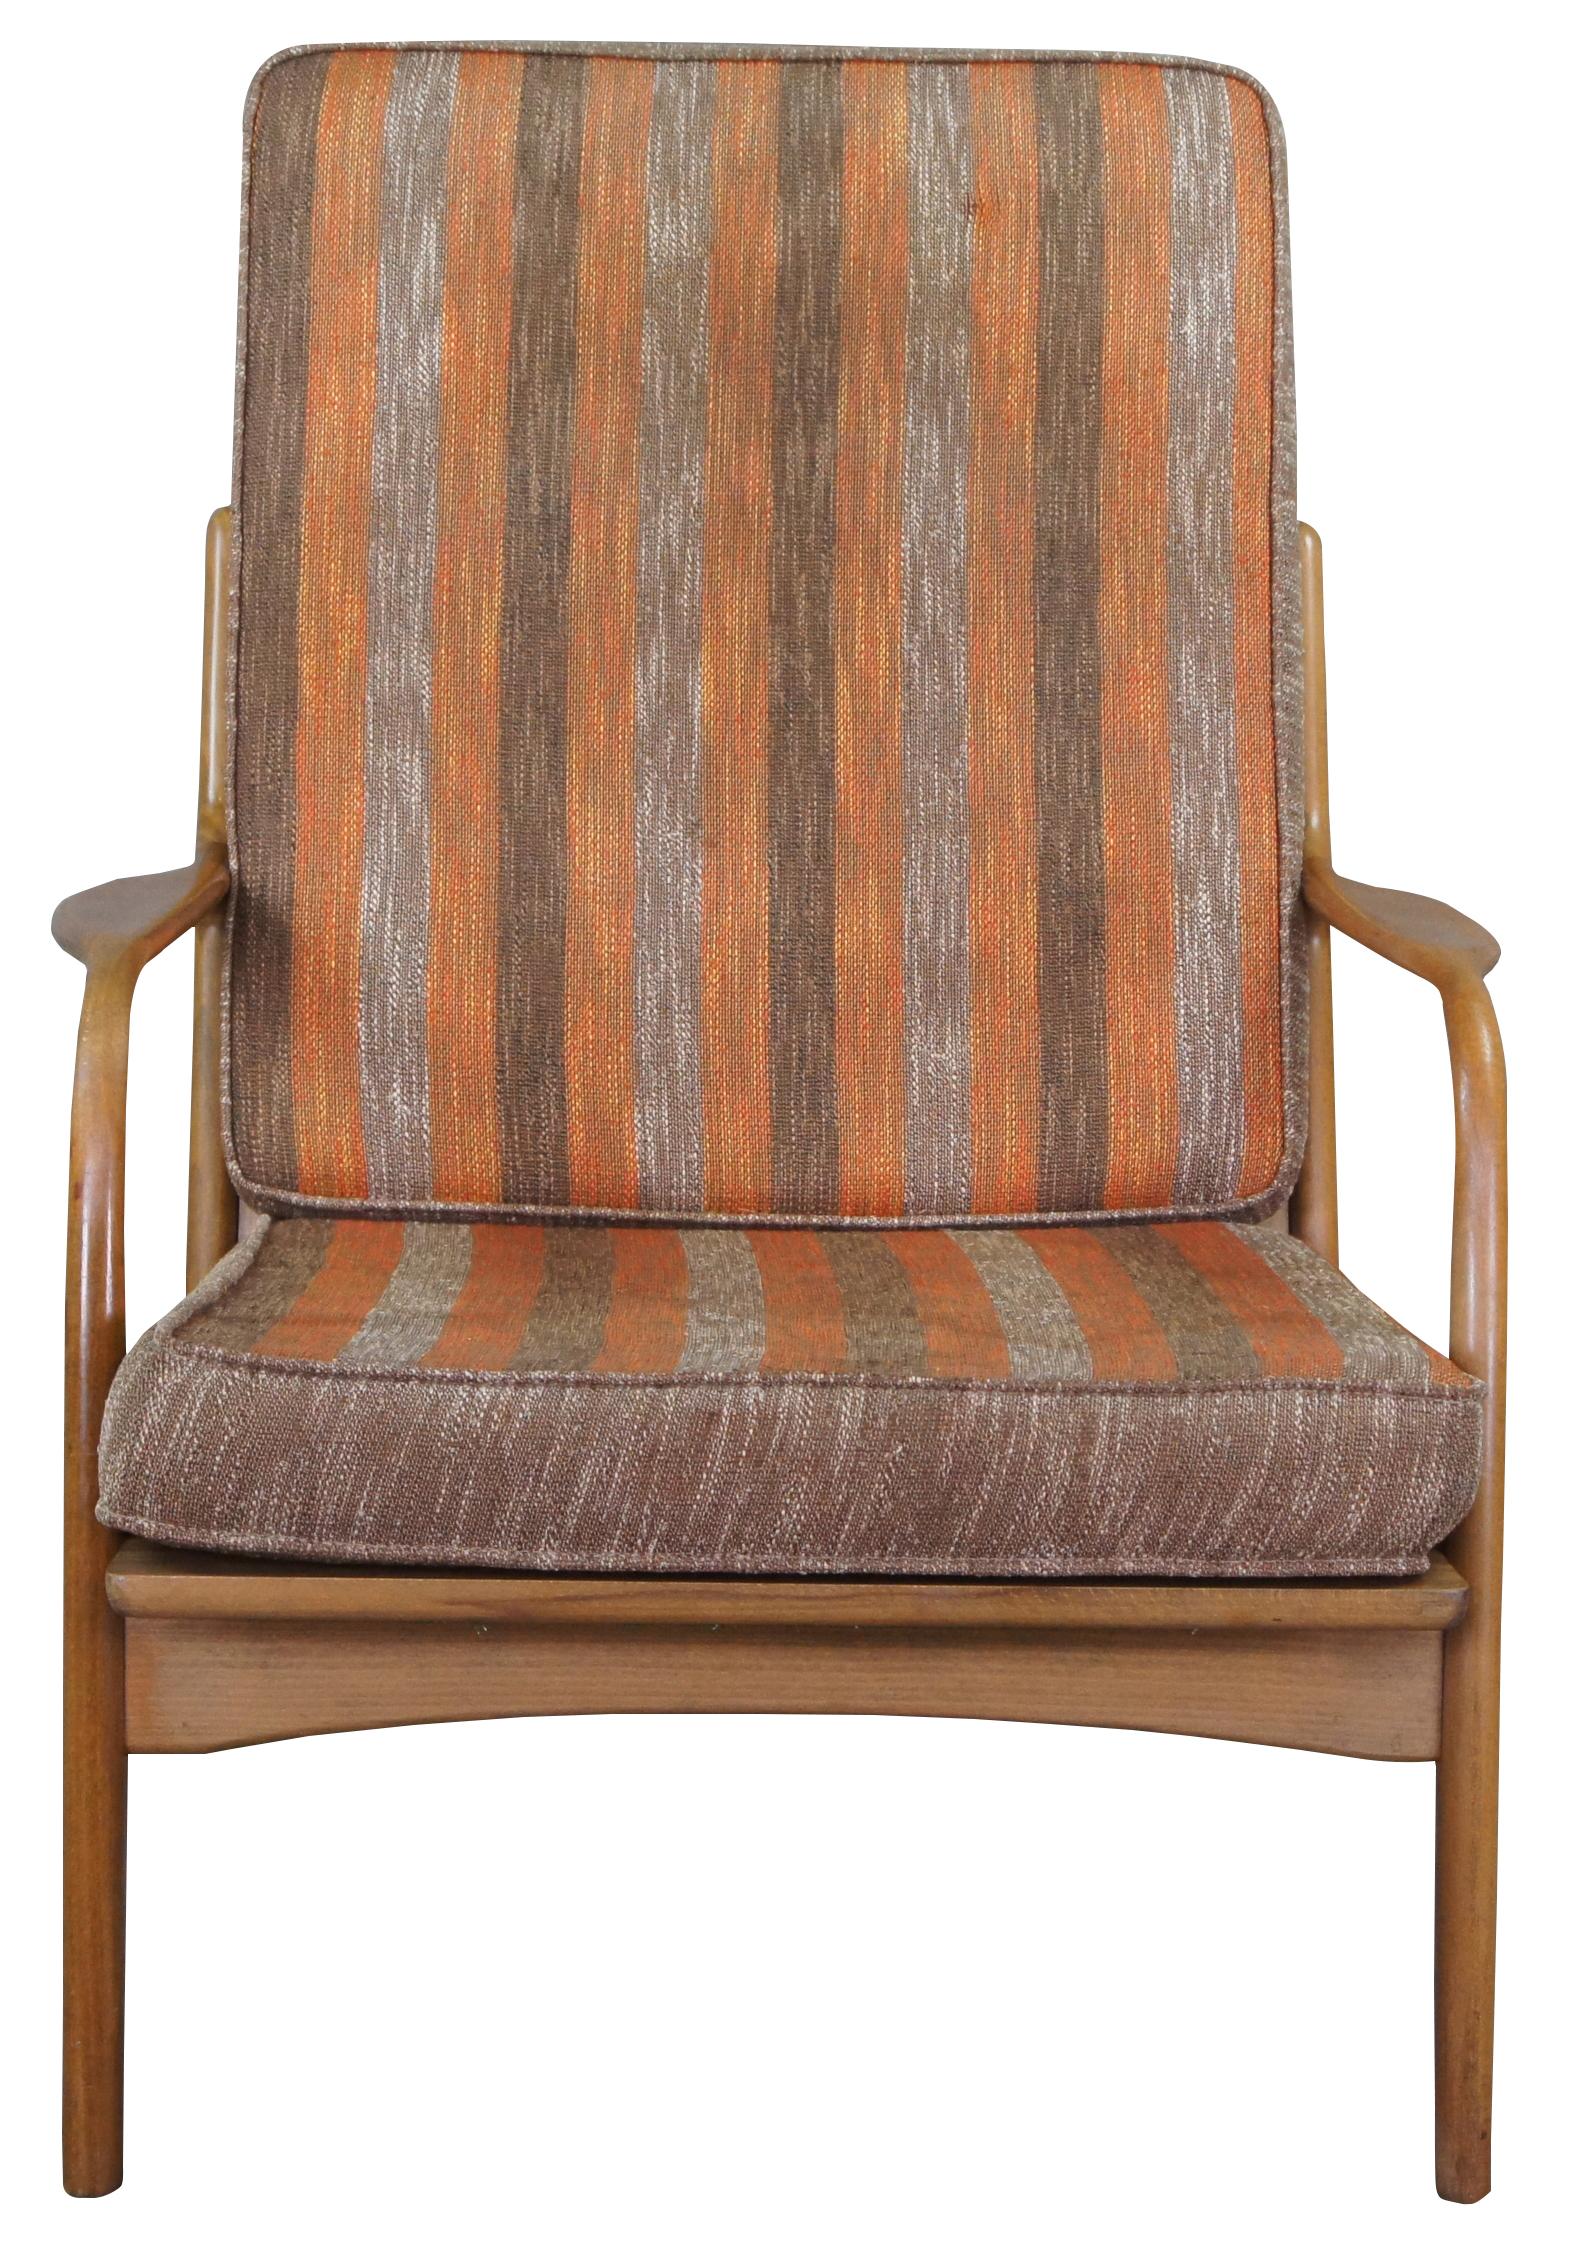 Vintage 1960s Mid-Century Modern arm chair. Made in Yugoslavia with a Danish / Scandinavian inspired crafting.
 